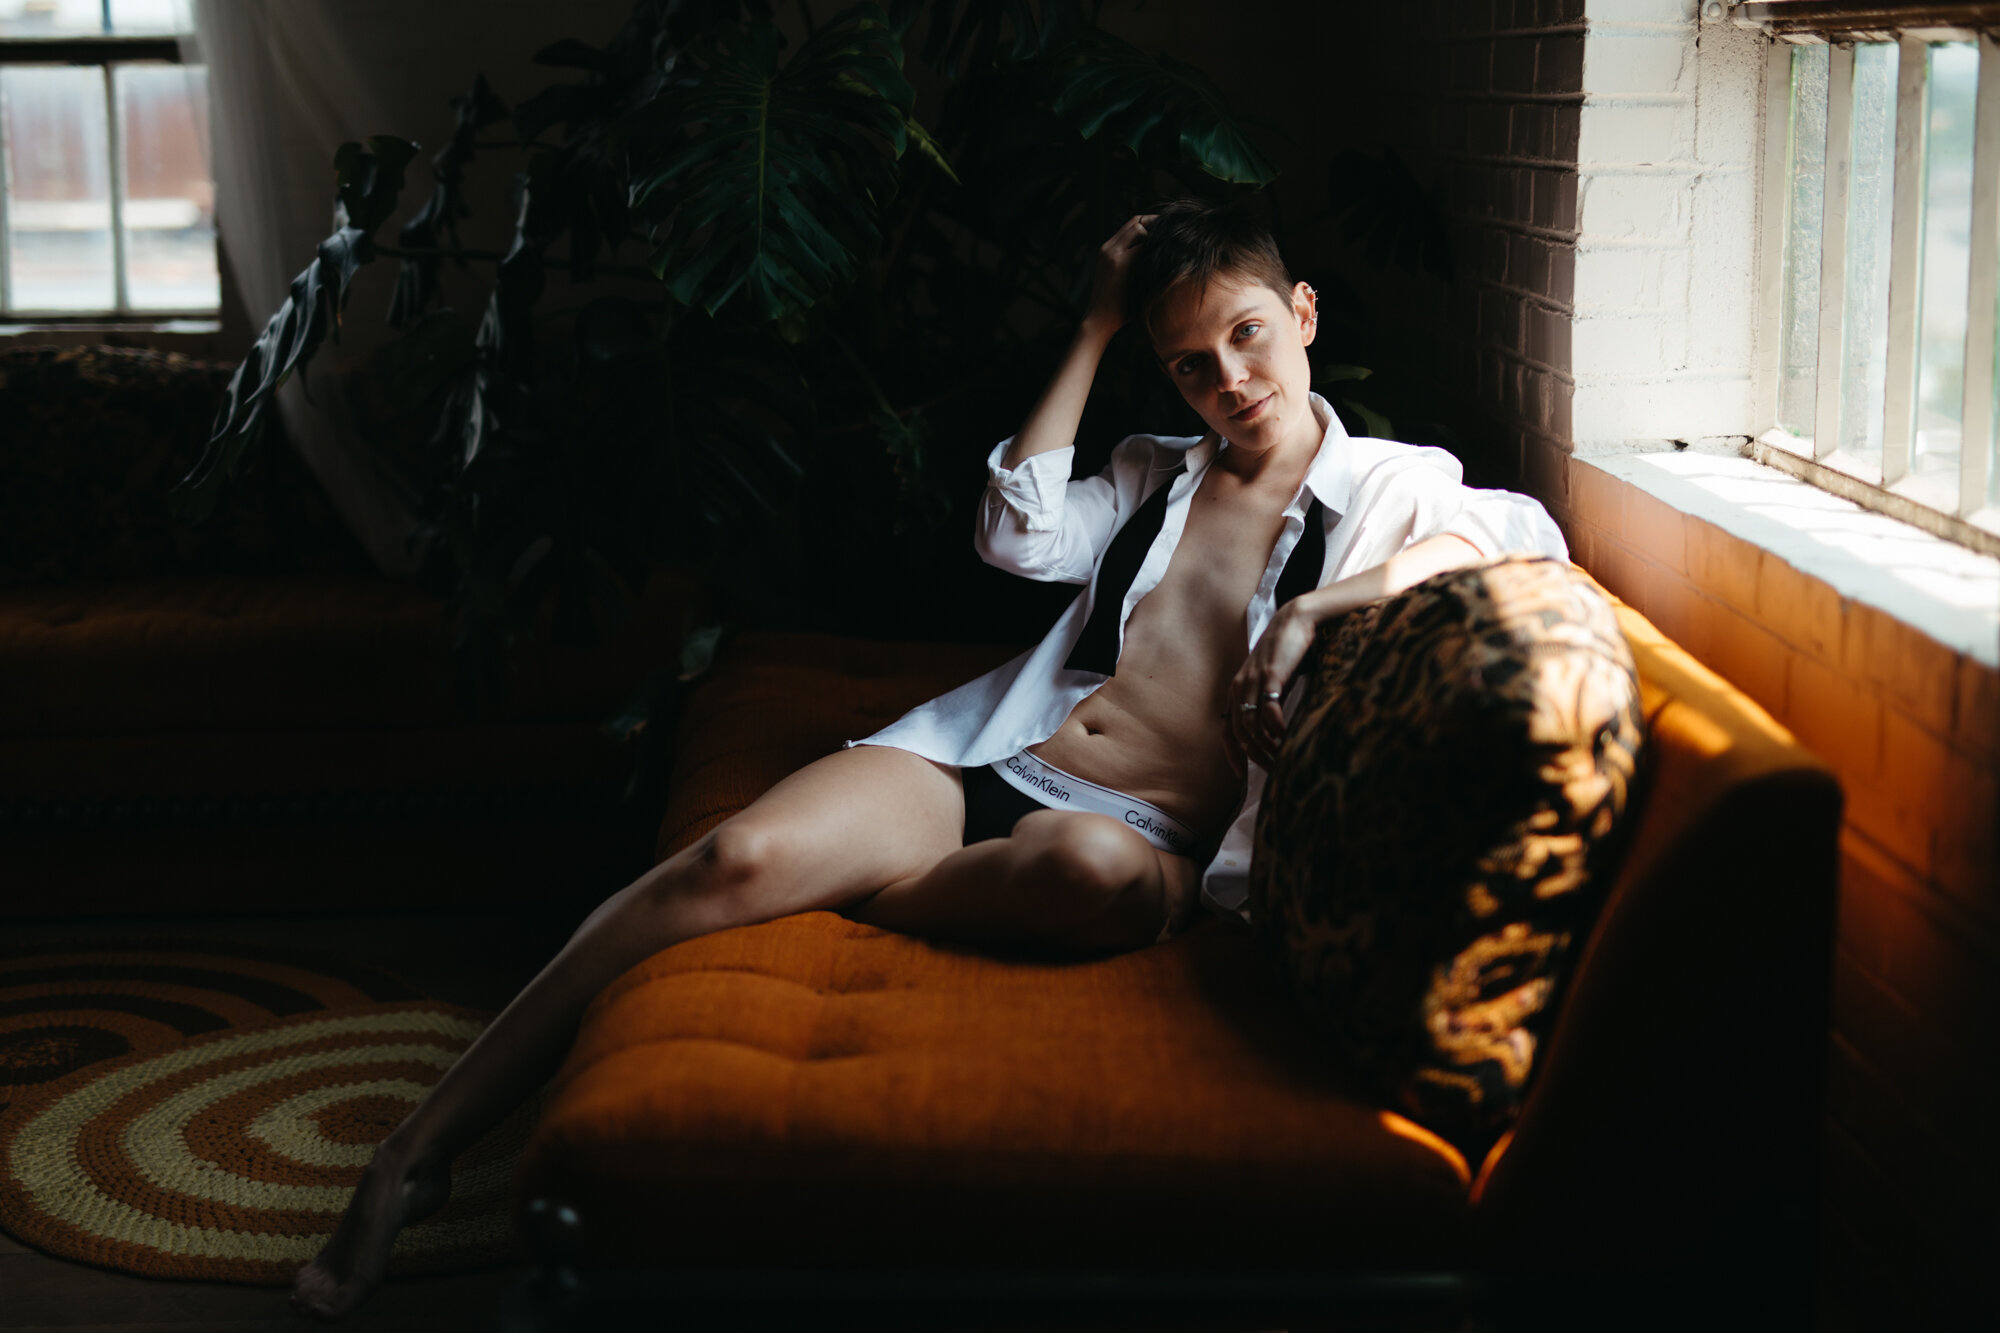 Genderqueer person in masculine attire with shirt unbuttoned and no pants, laying on couch